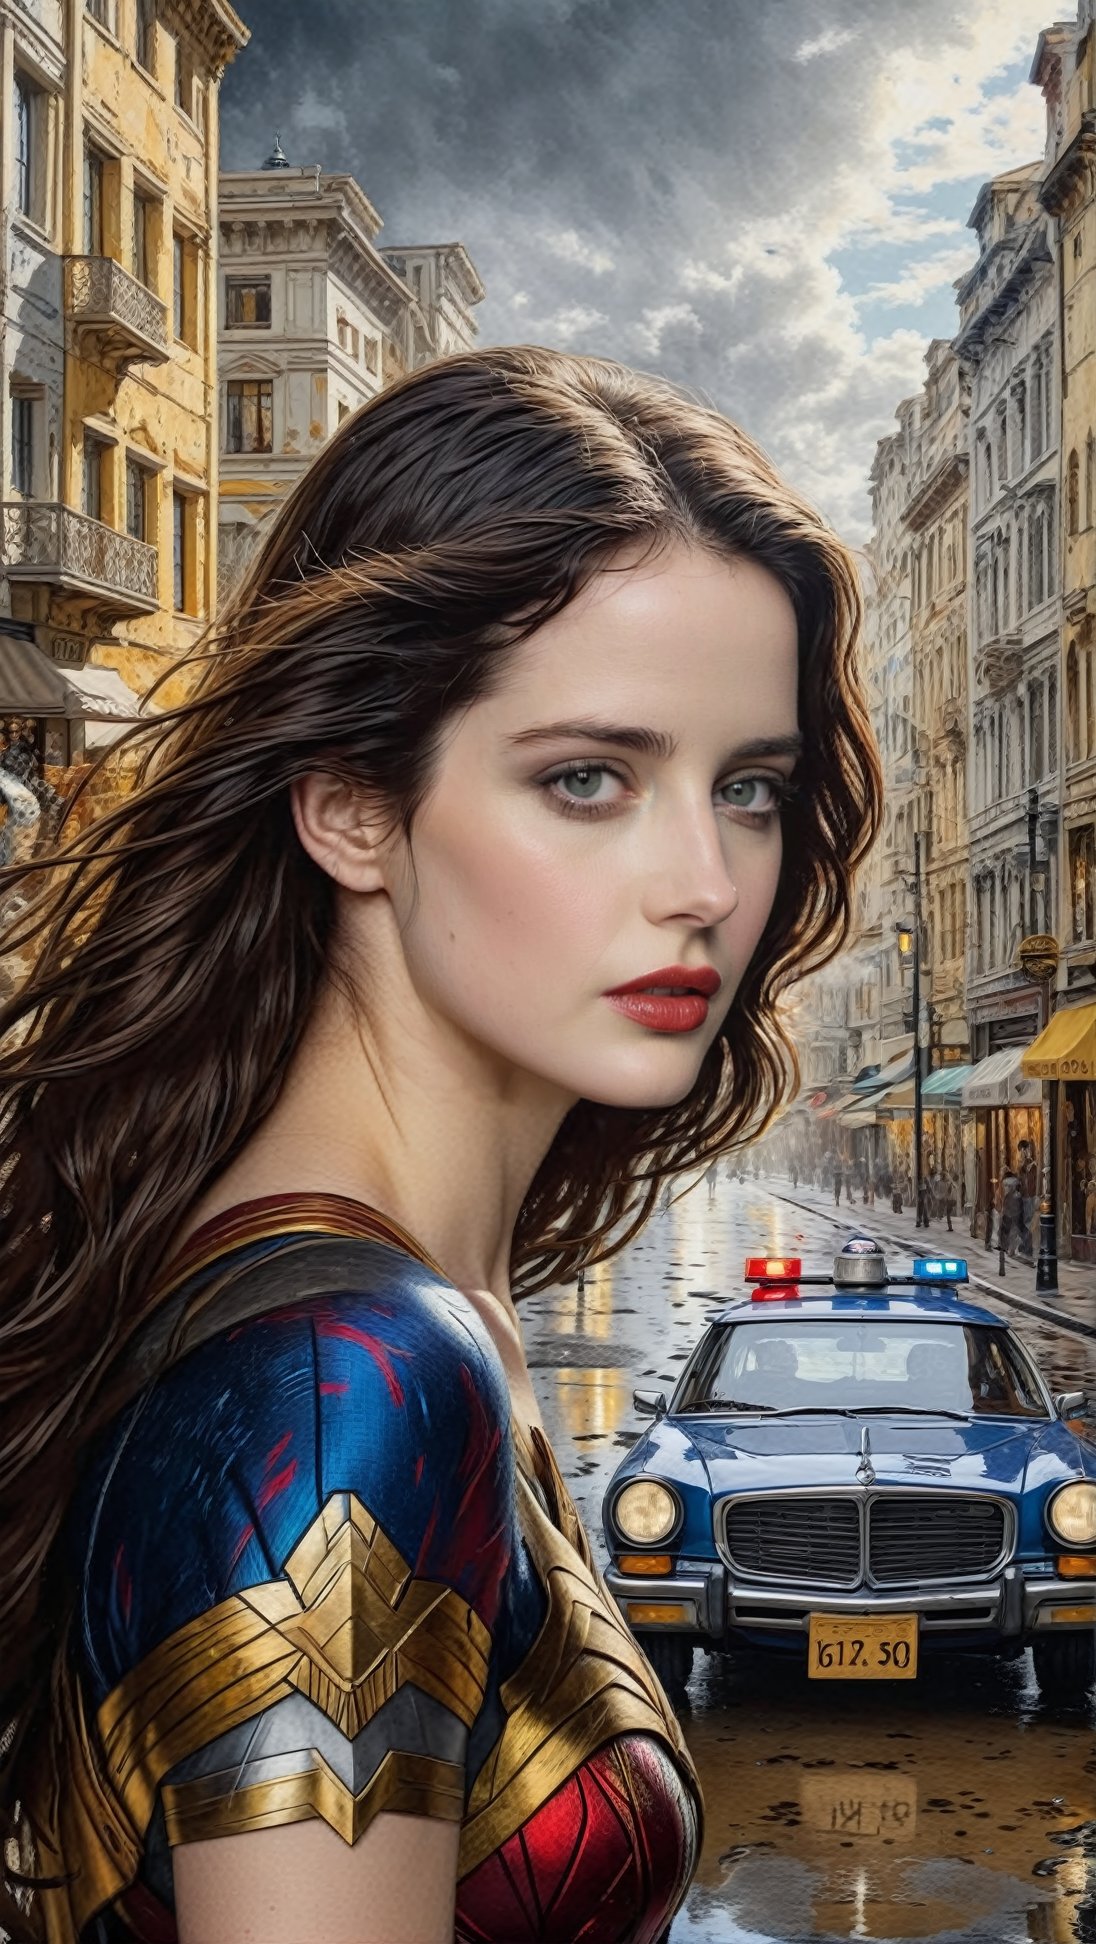 Hyper-Realistic photo of a beautiful girl standing in a street,20yo,1girl,solo,detailed exquisite face,looking at viewer,Eva Green lookalike
BREAK
backdrop:city street,police car,puddles,cluttered maximalism
BREAK
settings: (rule of thirds1.3),perfect composition,studio photo,trending on artstation,depth of perspective,(Masterpiece,Best quality,32k,UHD:1.4),(sharp focus,high contrast,HDR,hyper-detailed,intricate details,ultra-realistic,kodachrome 800:1.3),(chiaroscuro lighting:1.3),(by Karol Bak $,Alessandro Pautasso $,Gustav Klimt $ and Hayao Miyazaki $:1.3),art_booster, photo_b00ster,real_booster,wonder-woman-xl